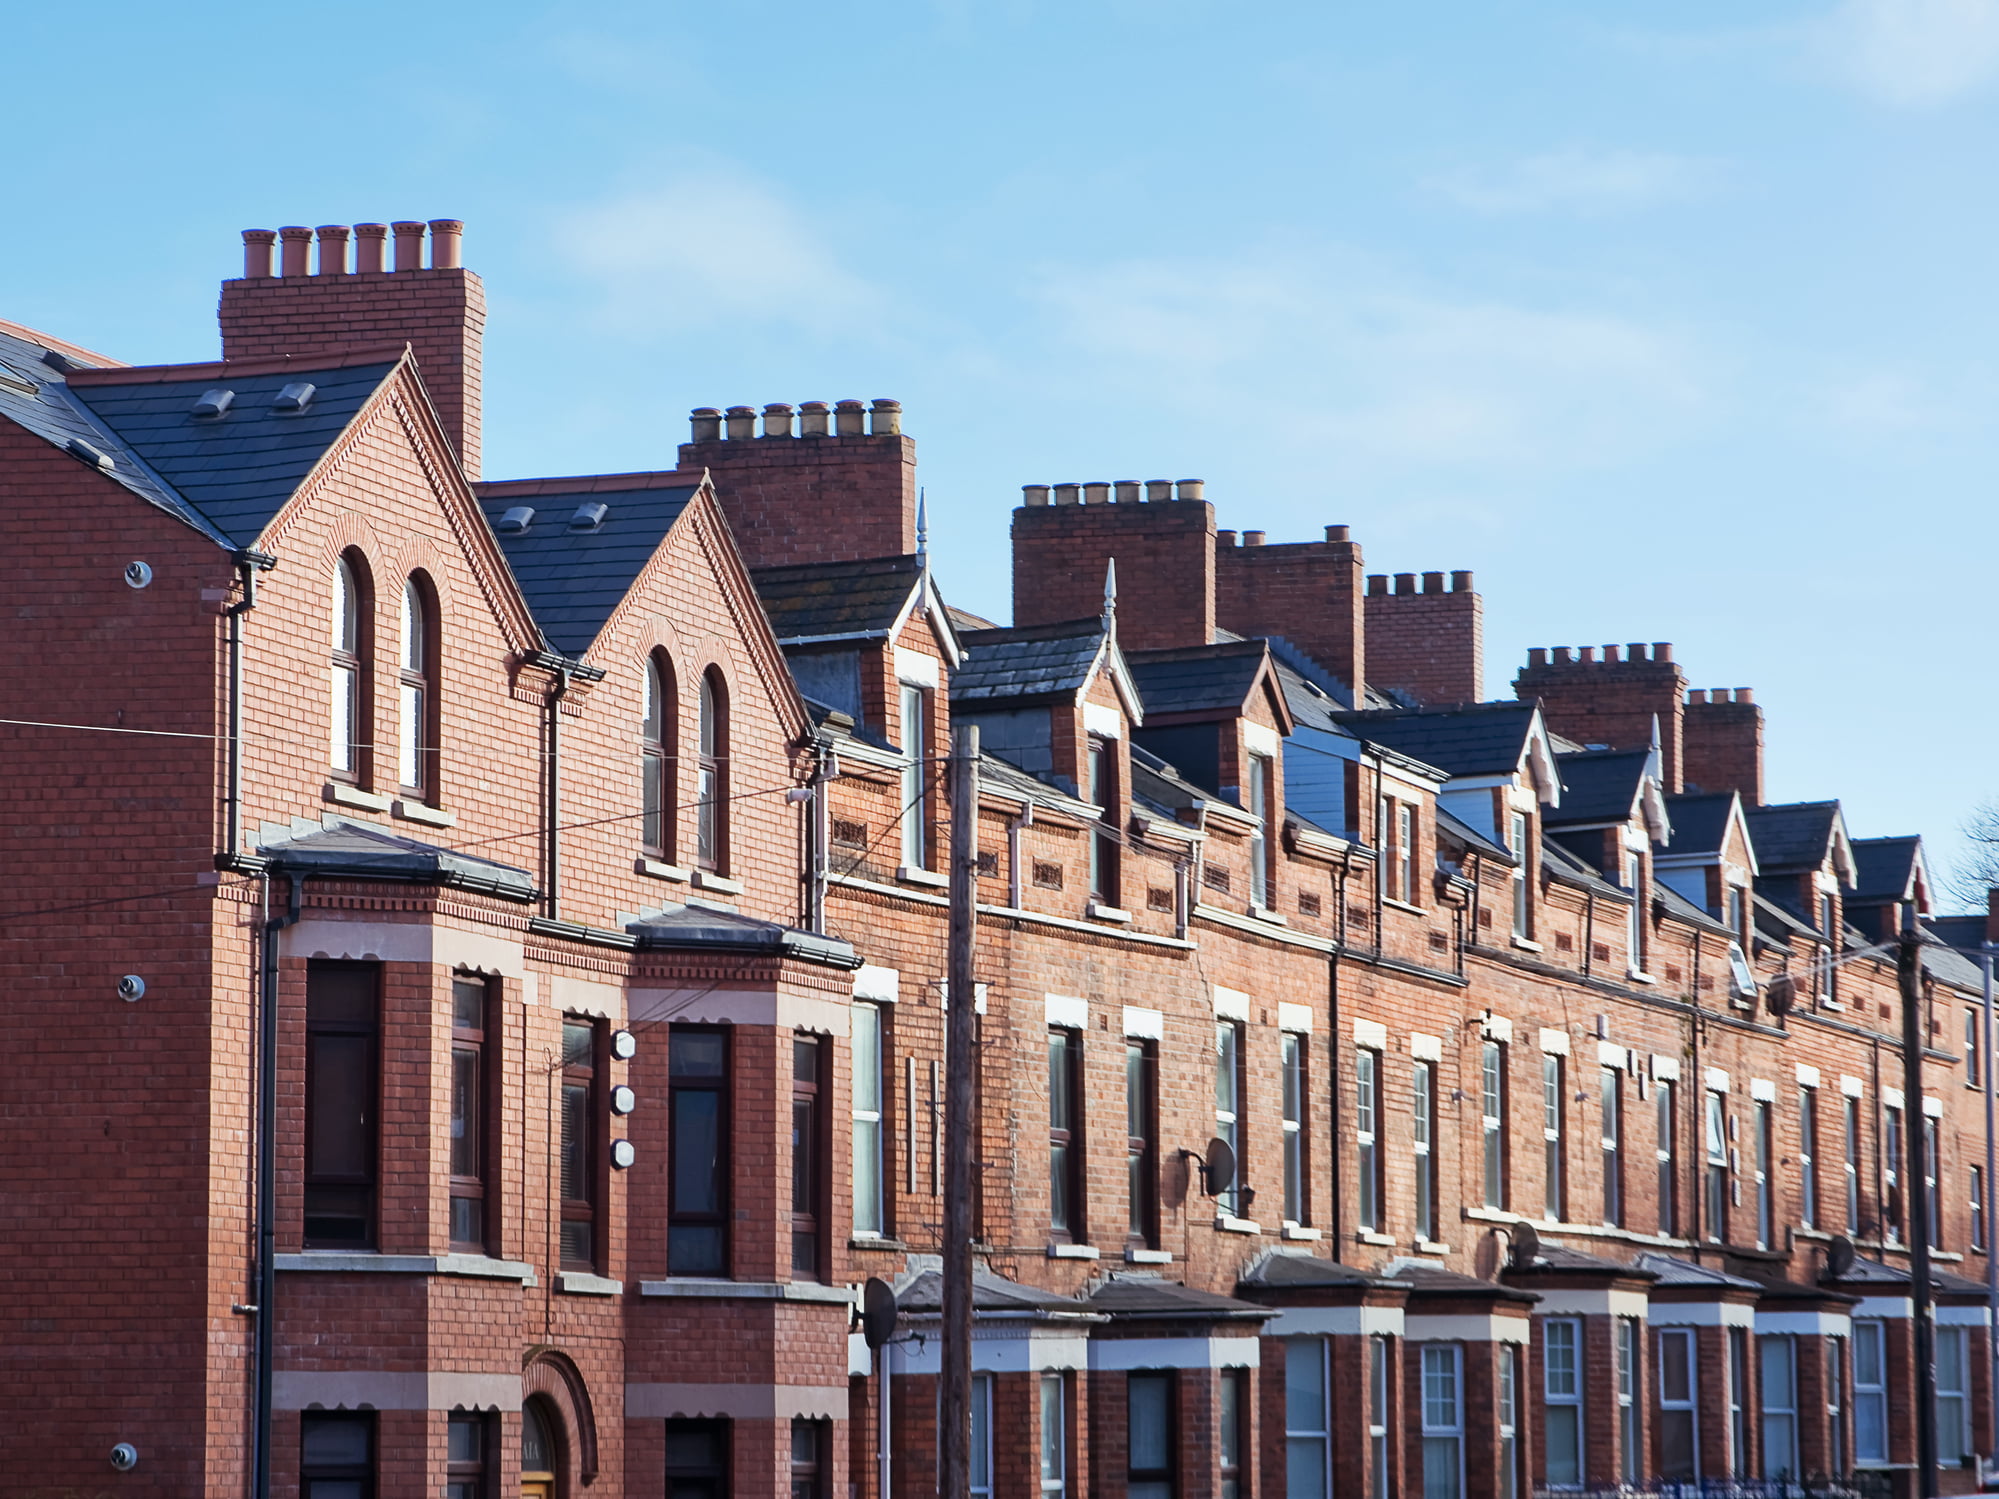 A row of houses on a residential street in Belfast.